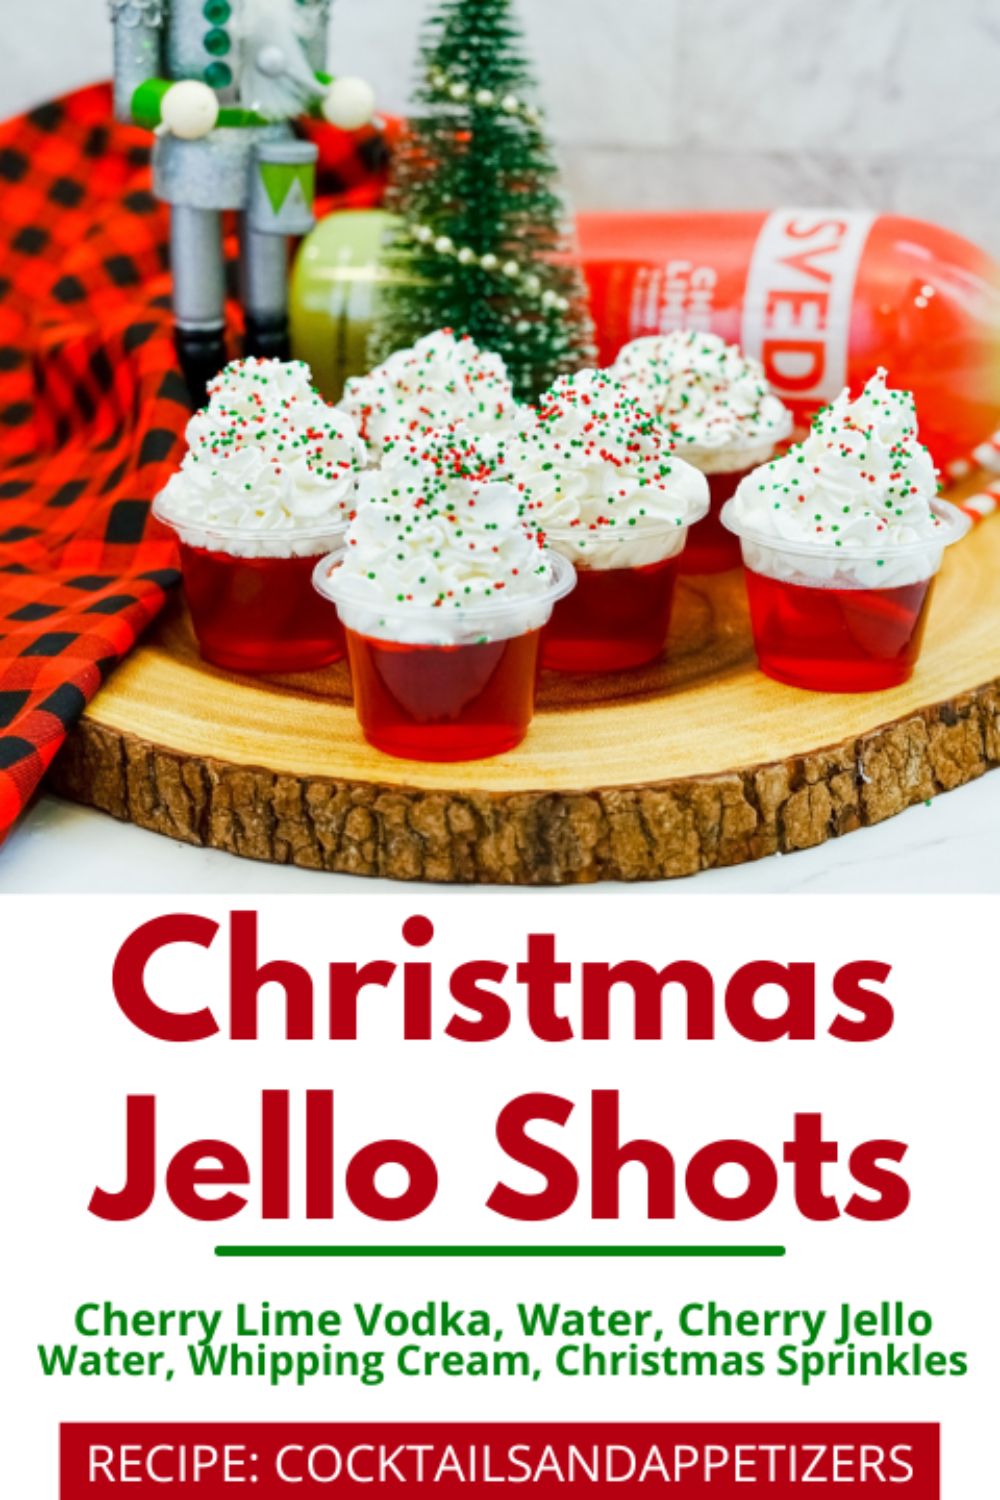 Christmas Jello shots with whipped cream topping and sprinkles on a wood slab.